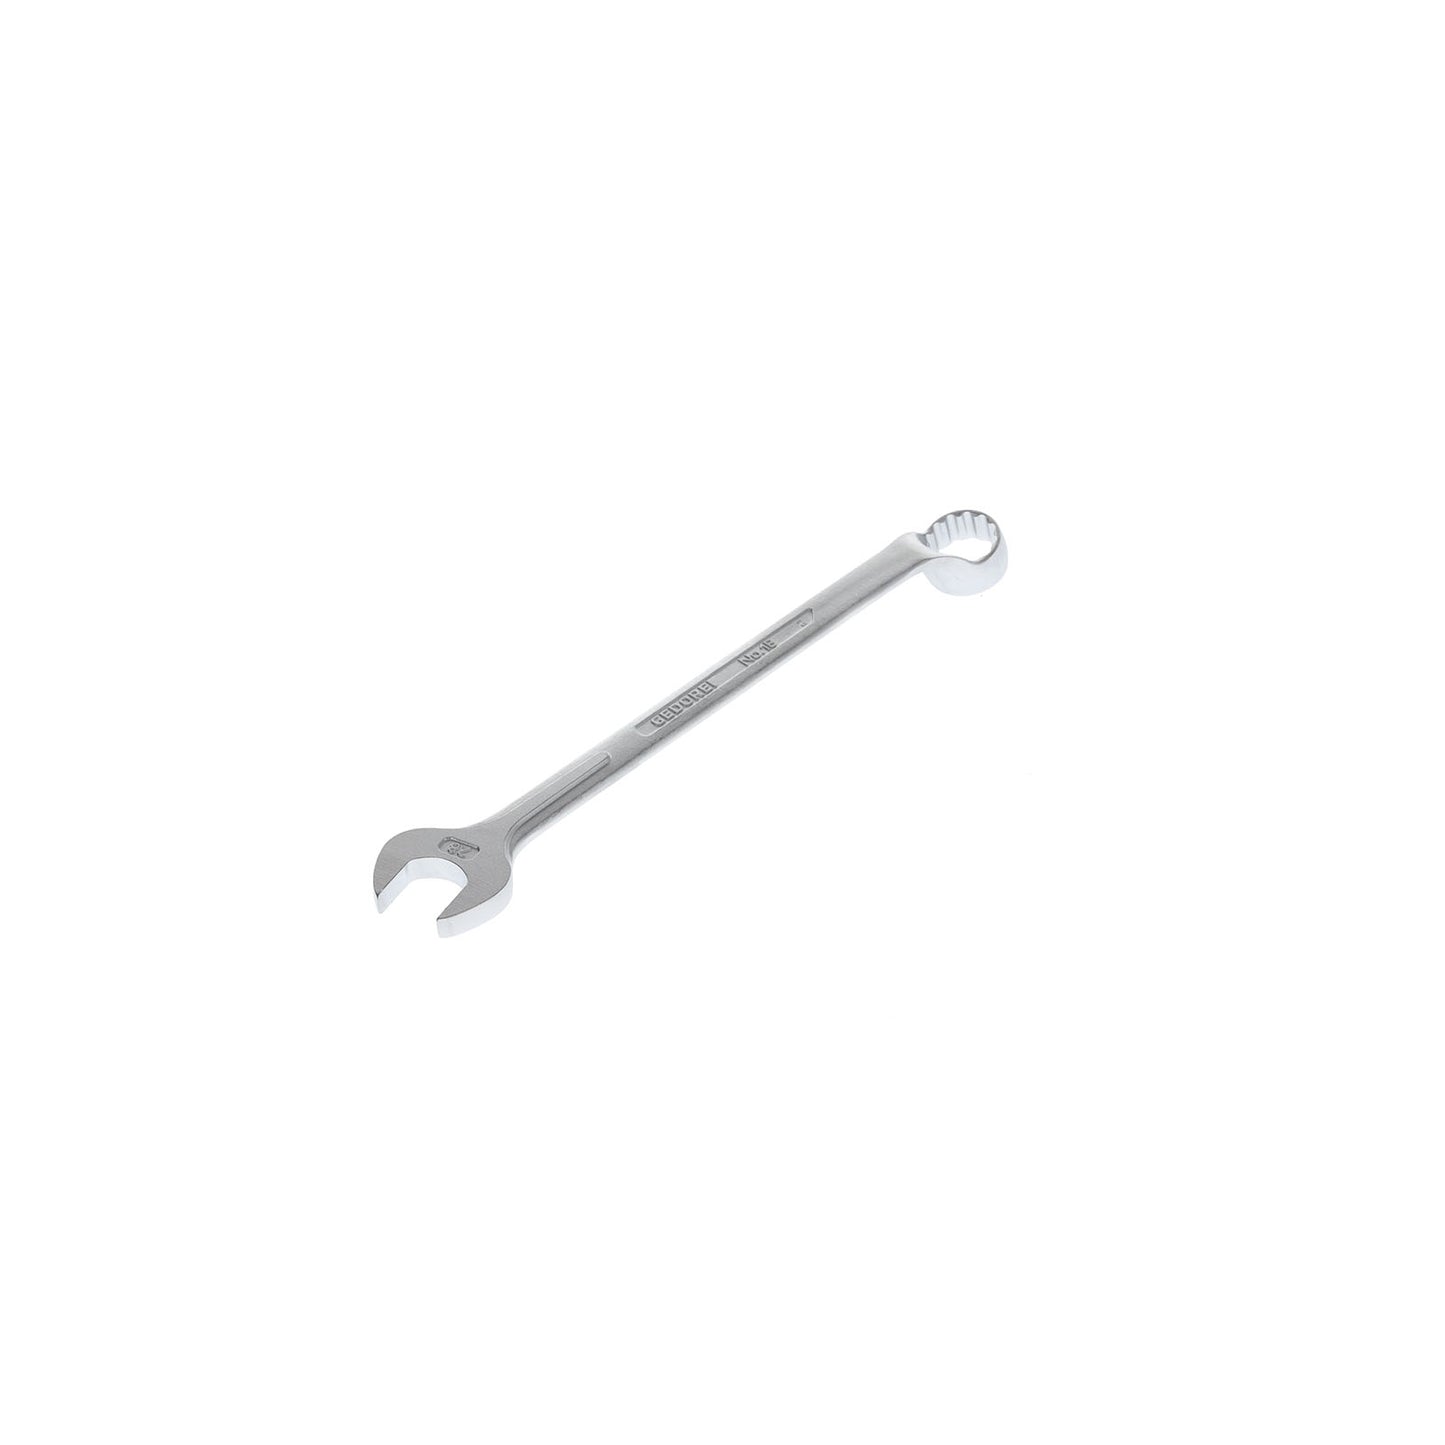 GEDORE 1 B 28 - Offset Combination Wrench, 28mm (6002880)